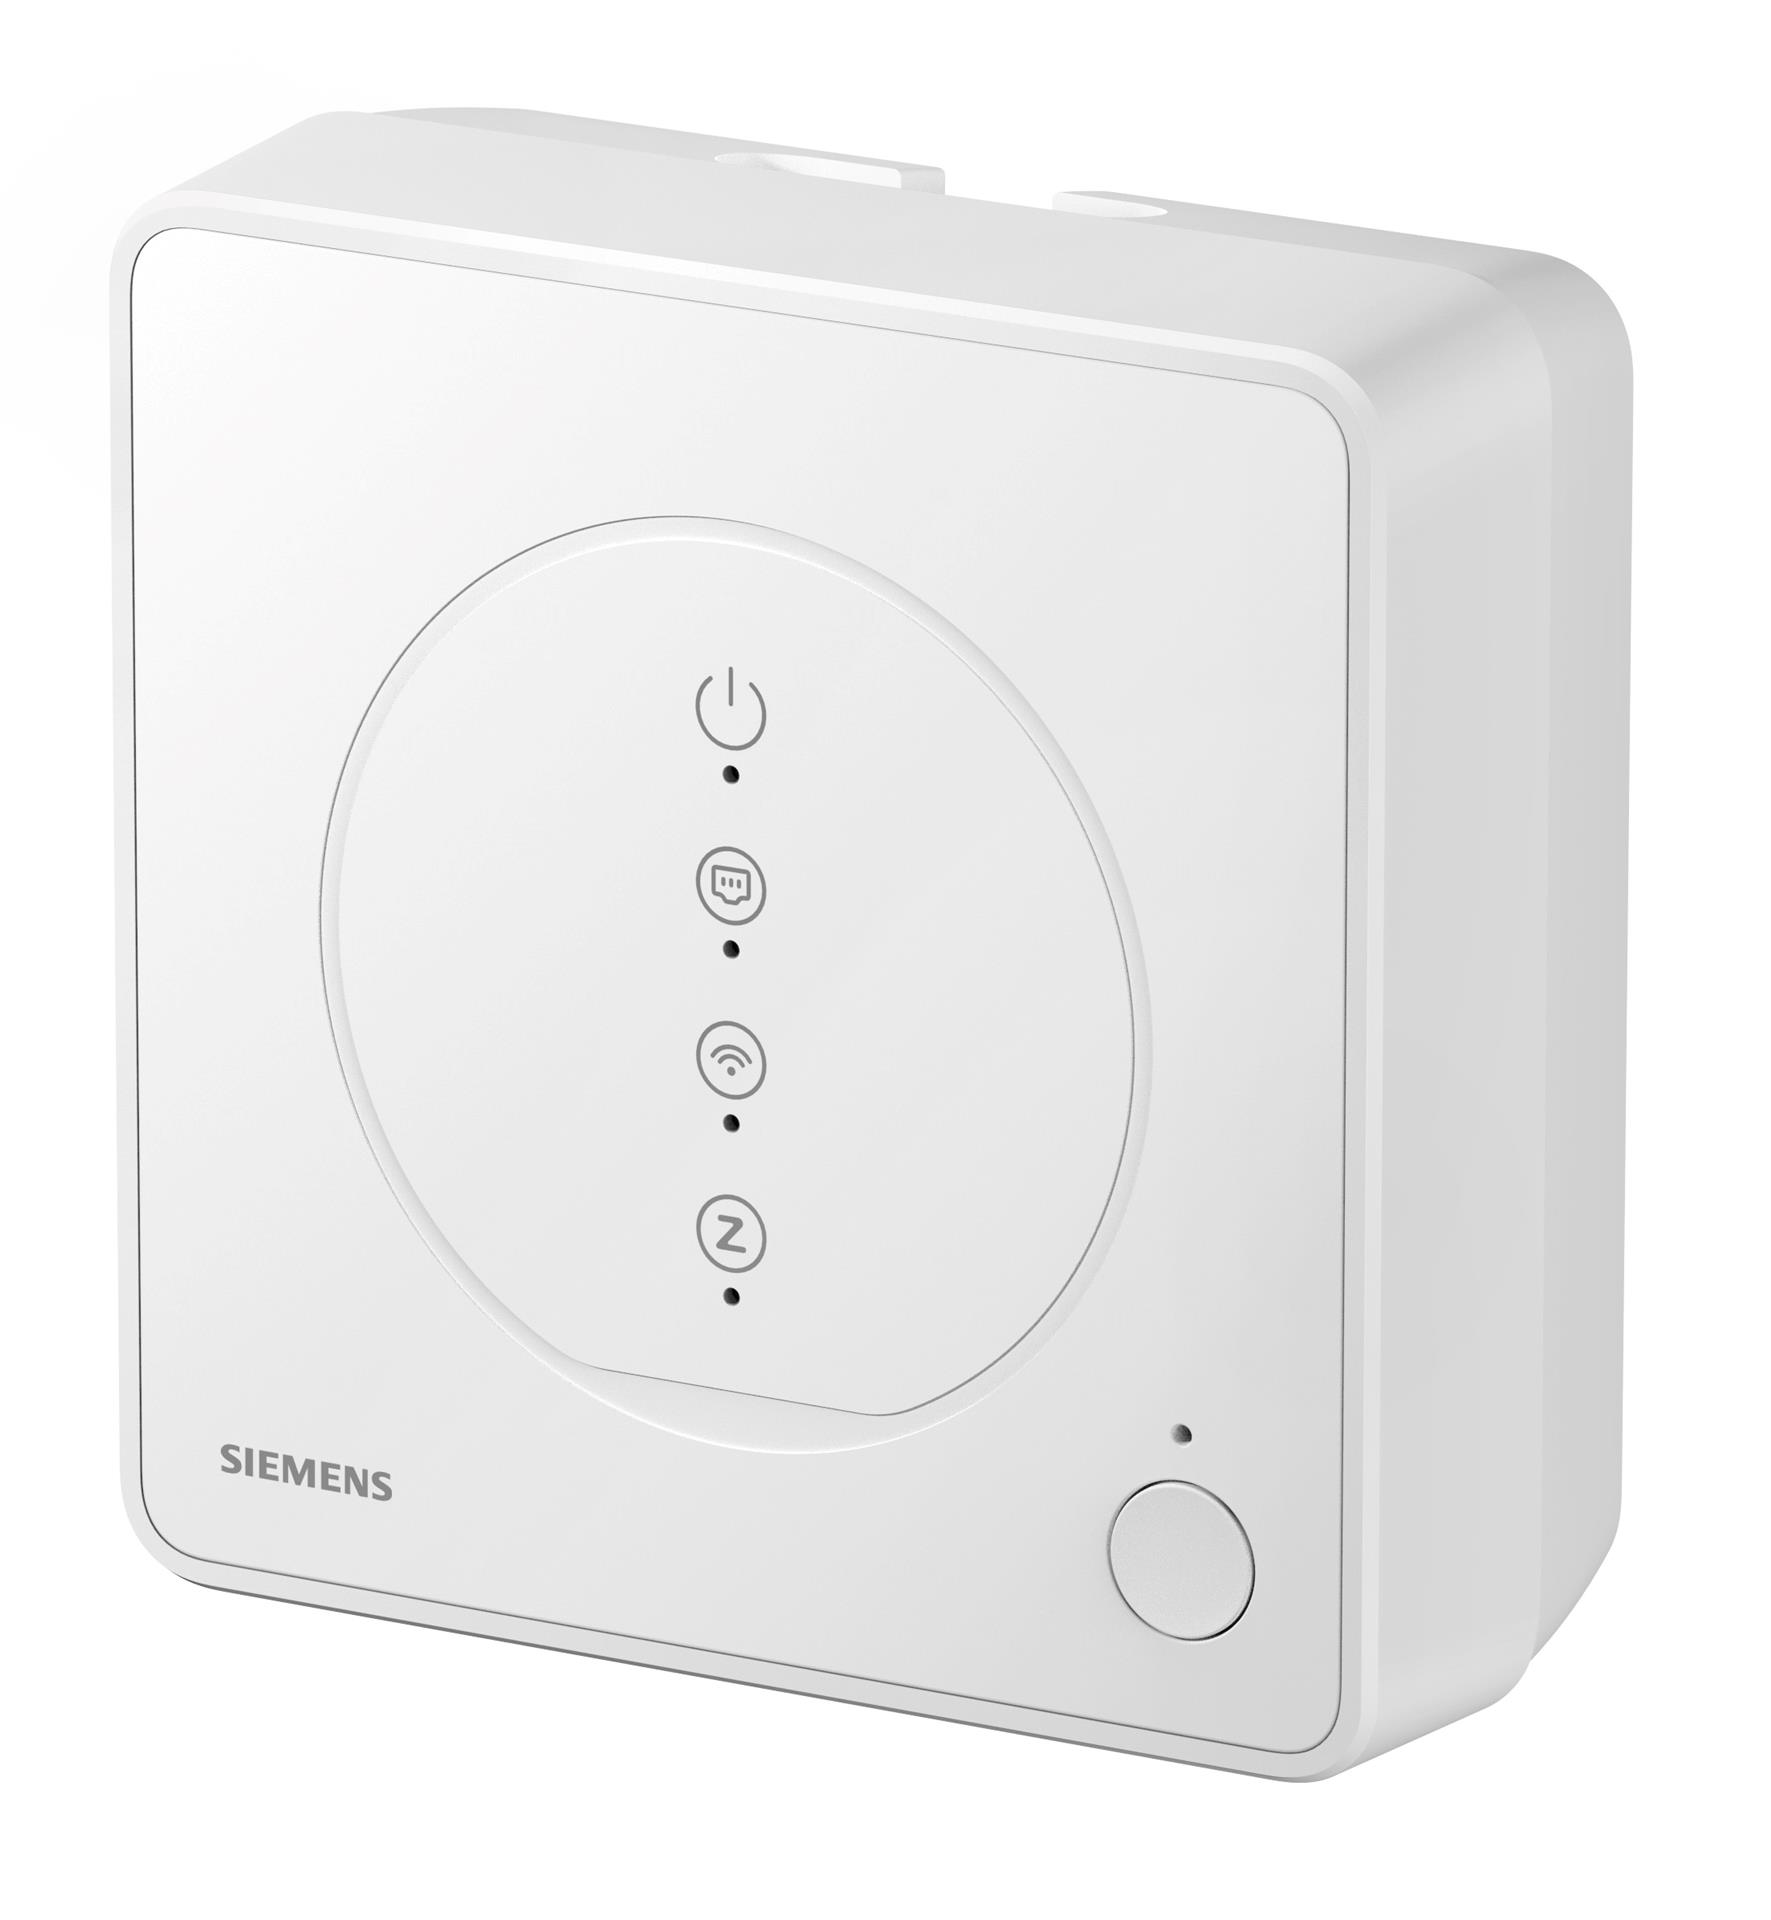 GTW100ZB Siemens Hub Connected Home